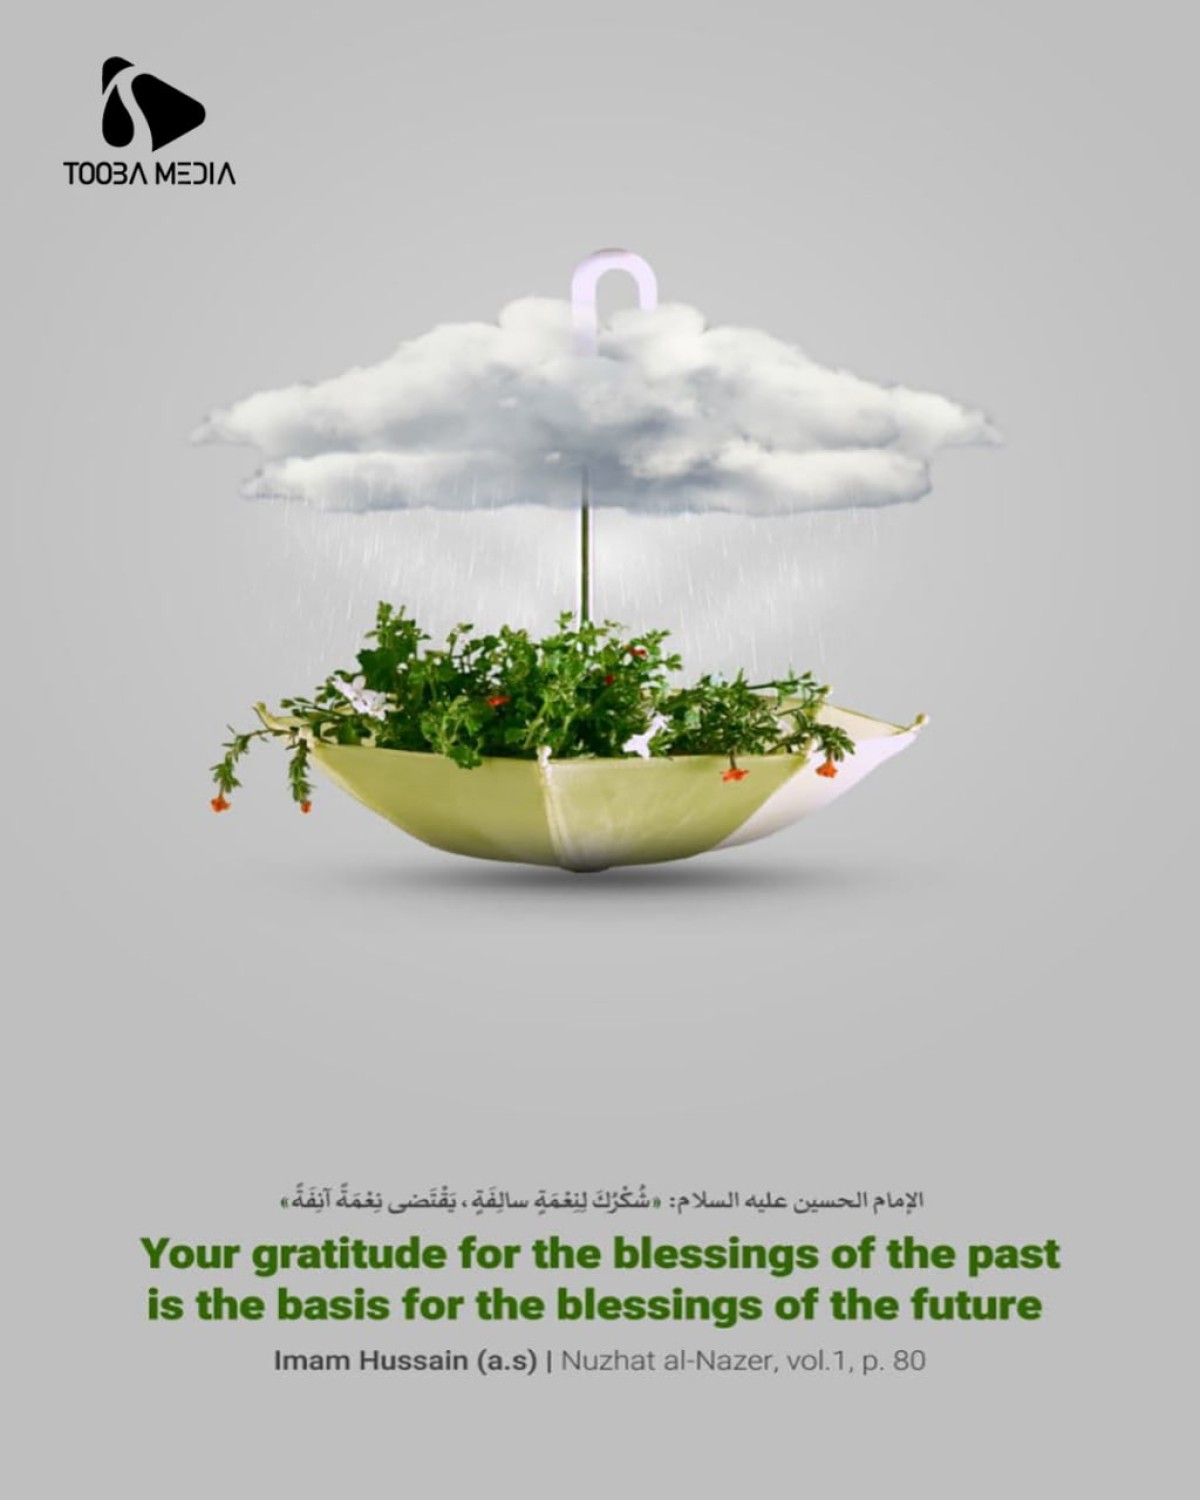 Your gratitude for the blessing of the past is the basis for the blessing of the future